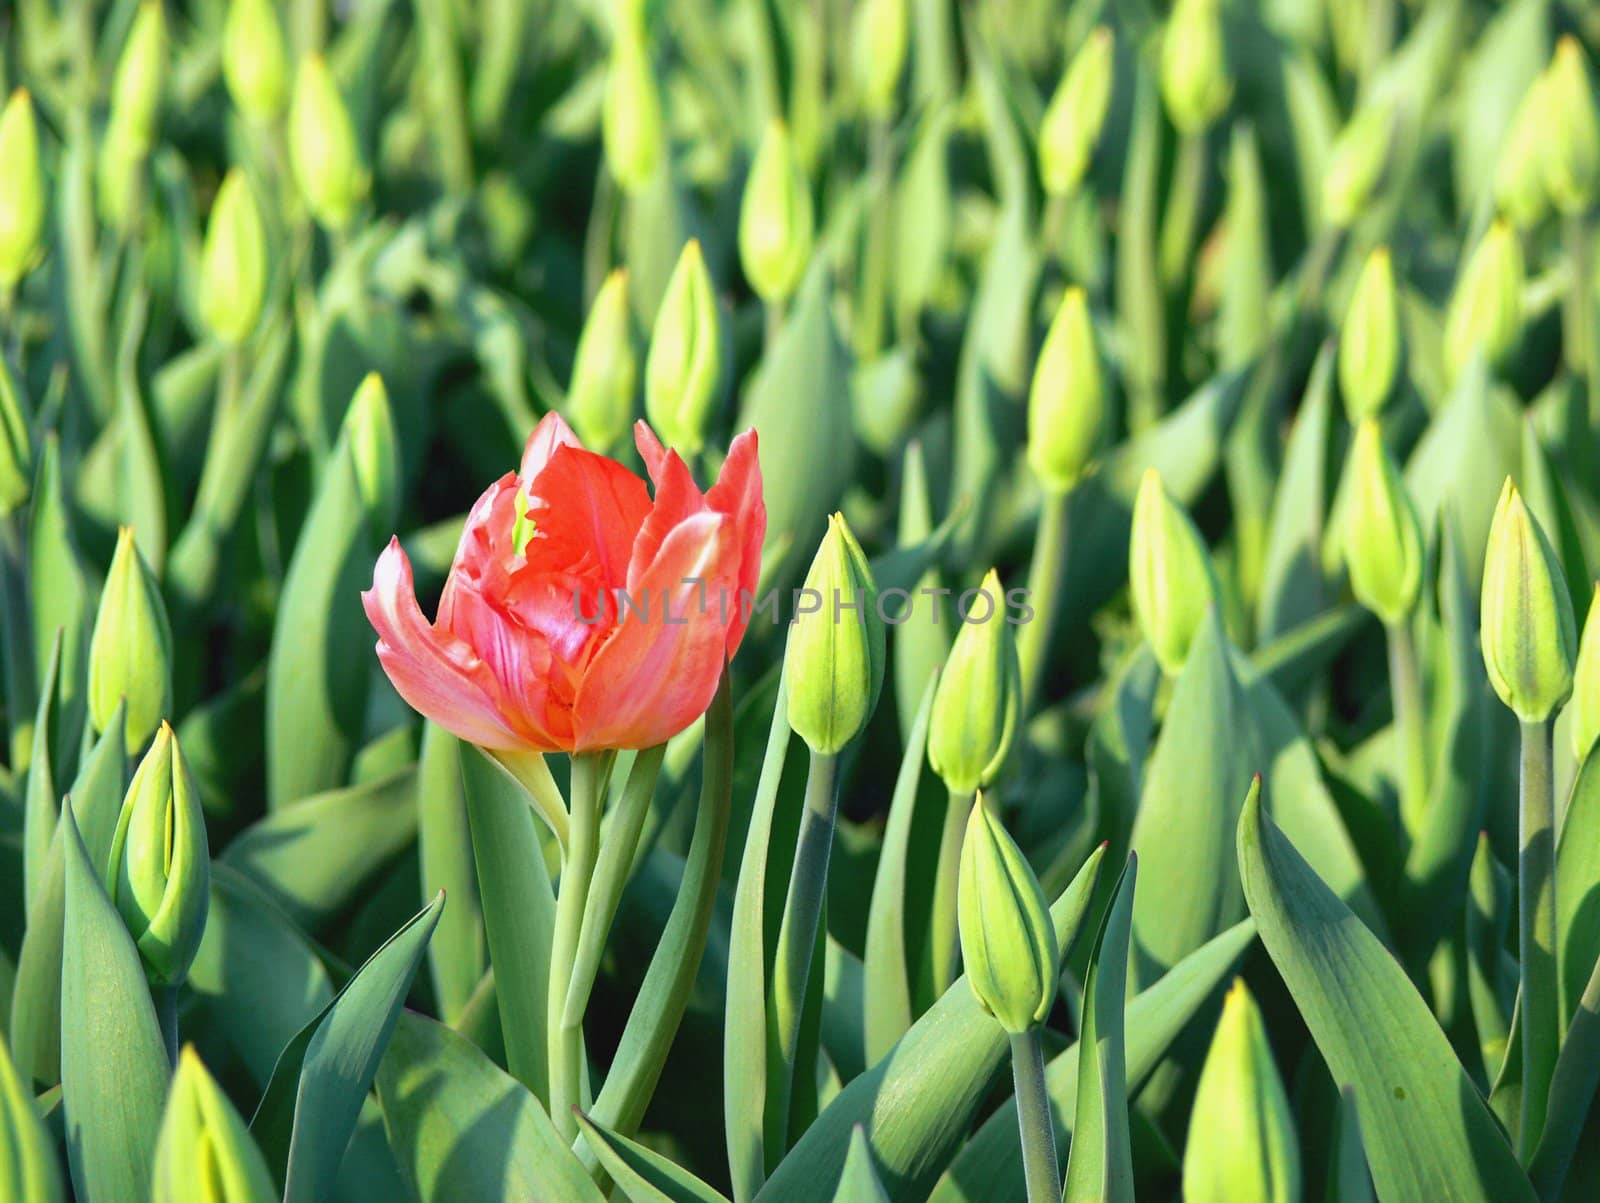 Single open red tulip surrounded by buds